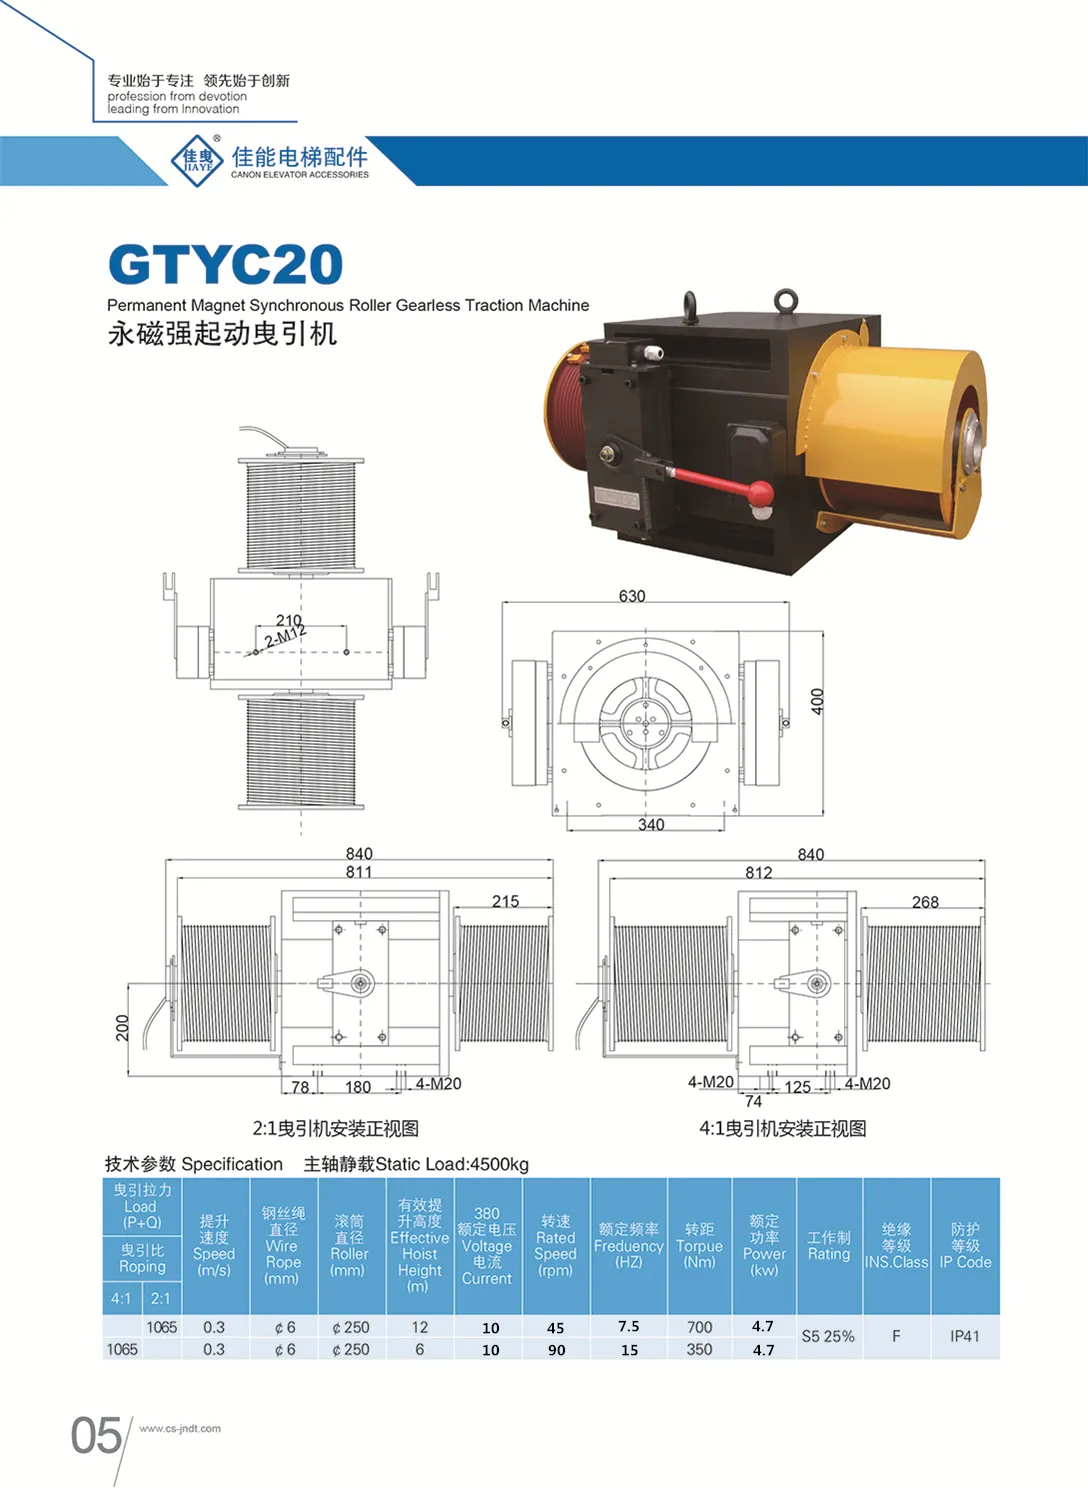 Trumtyp Hiss Lift Permanent Magnet Synkron Roller Gearless Traction Machine / Motor MRL Spara utrymme